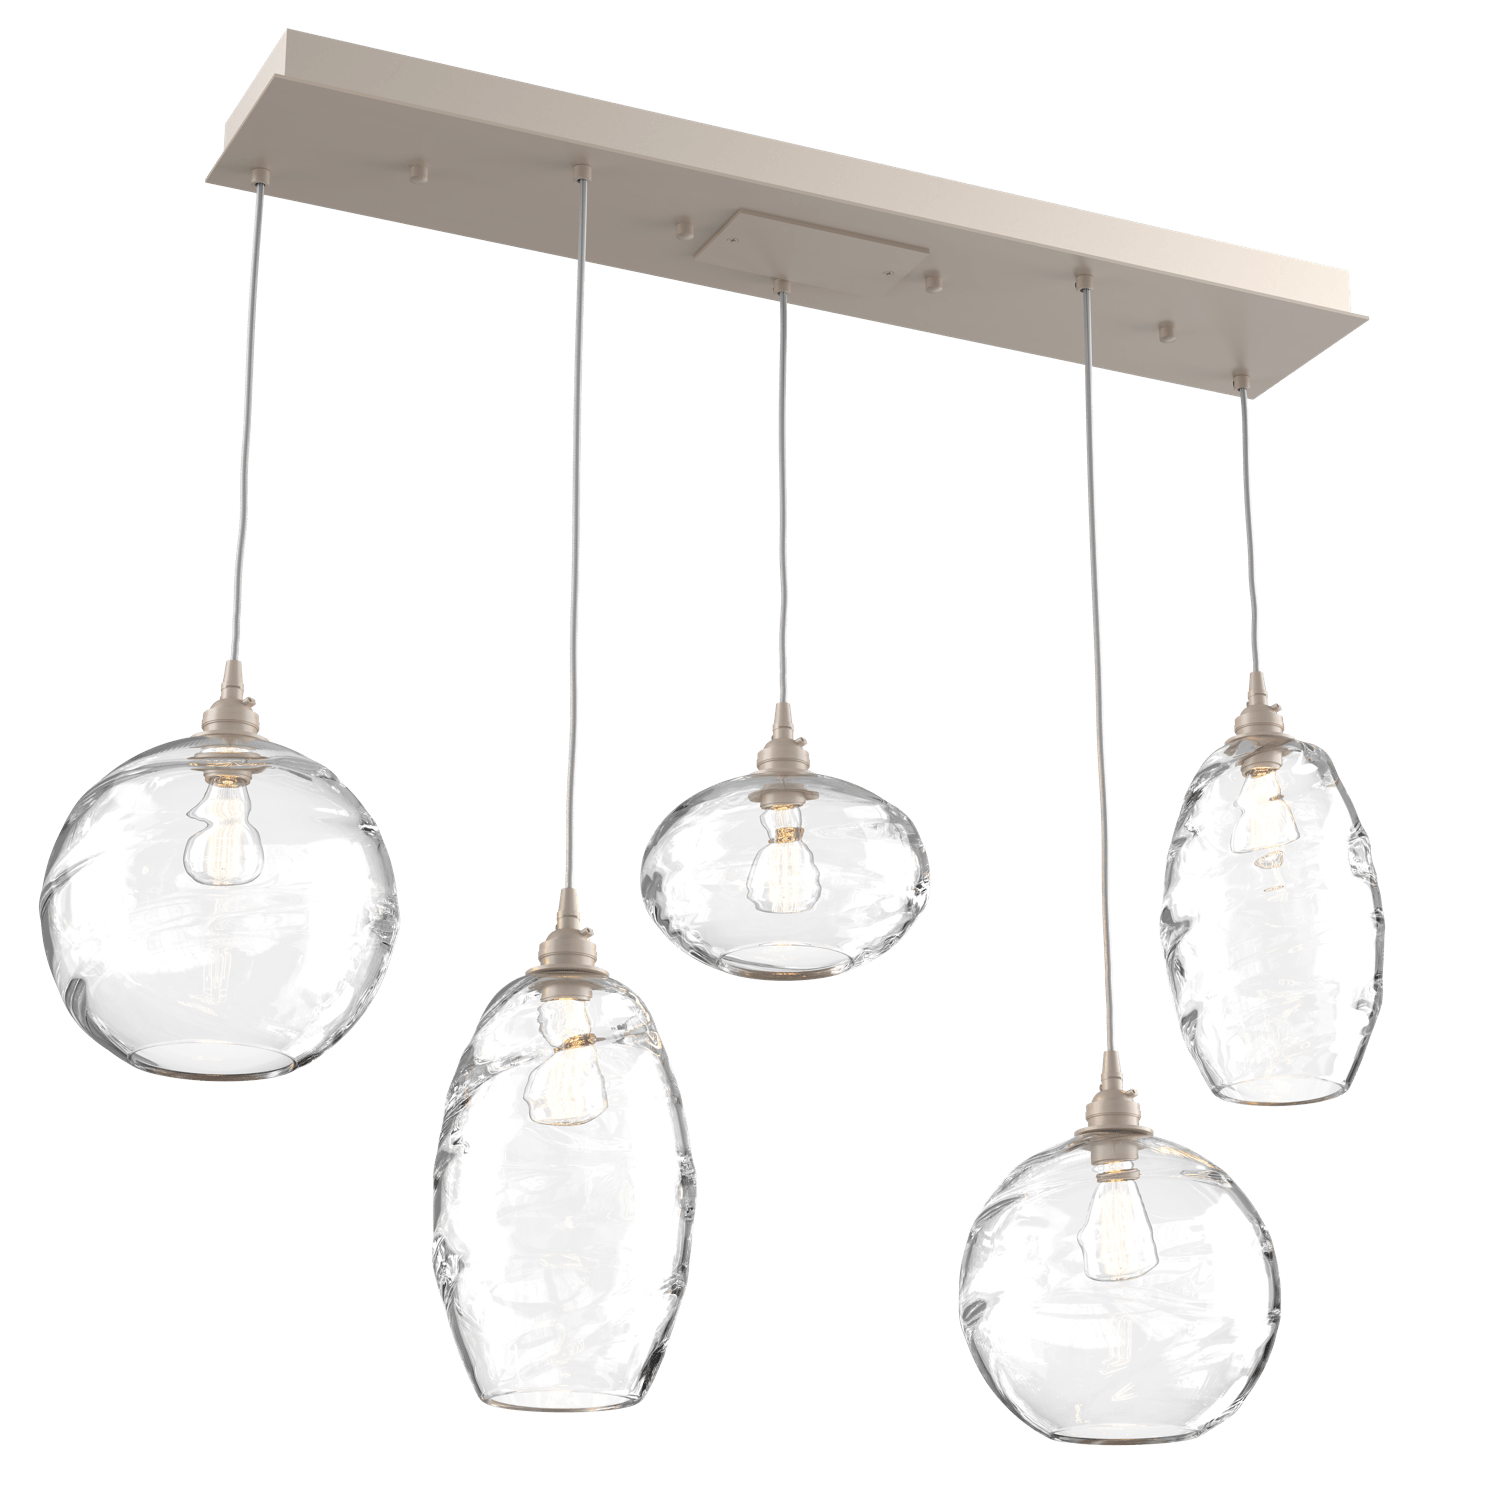 PLB0048-05-BS-OC-Hammerton-Studio-Optic-Blown-Glass-Misto-5-light-linear-pendant-chandelier-with-metallic-beige-silver-finish-and-optic-clear-blown-glass-shades-and-incandescent-lamping